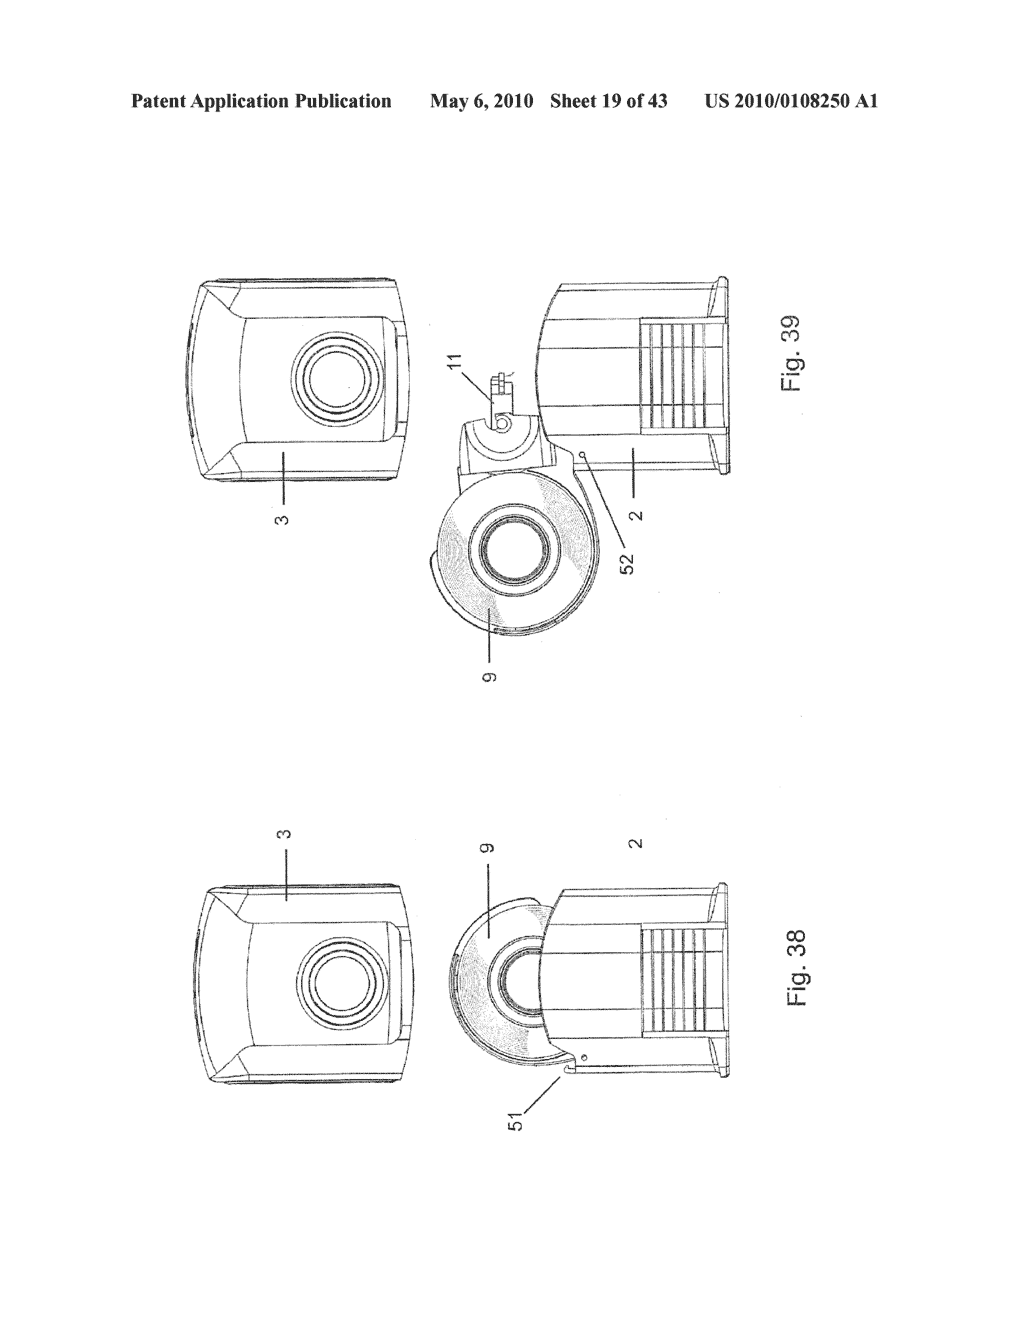 ADHESIVE TAPE STAMP AND METHOD FOR STAMPING AN ADHESIVE TAPE SECTION ONTO AN OBJECT - diagram, schematic, and image 20